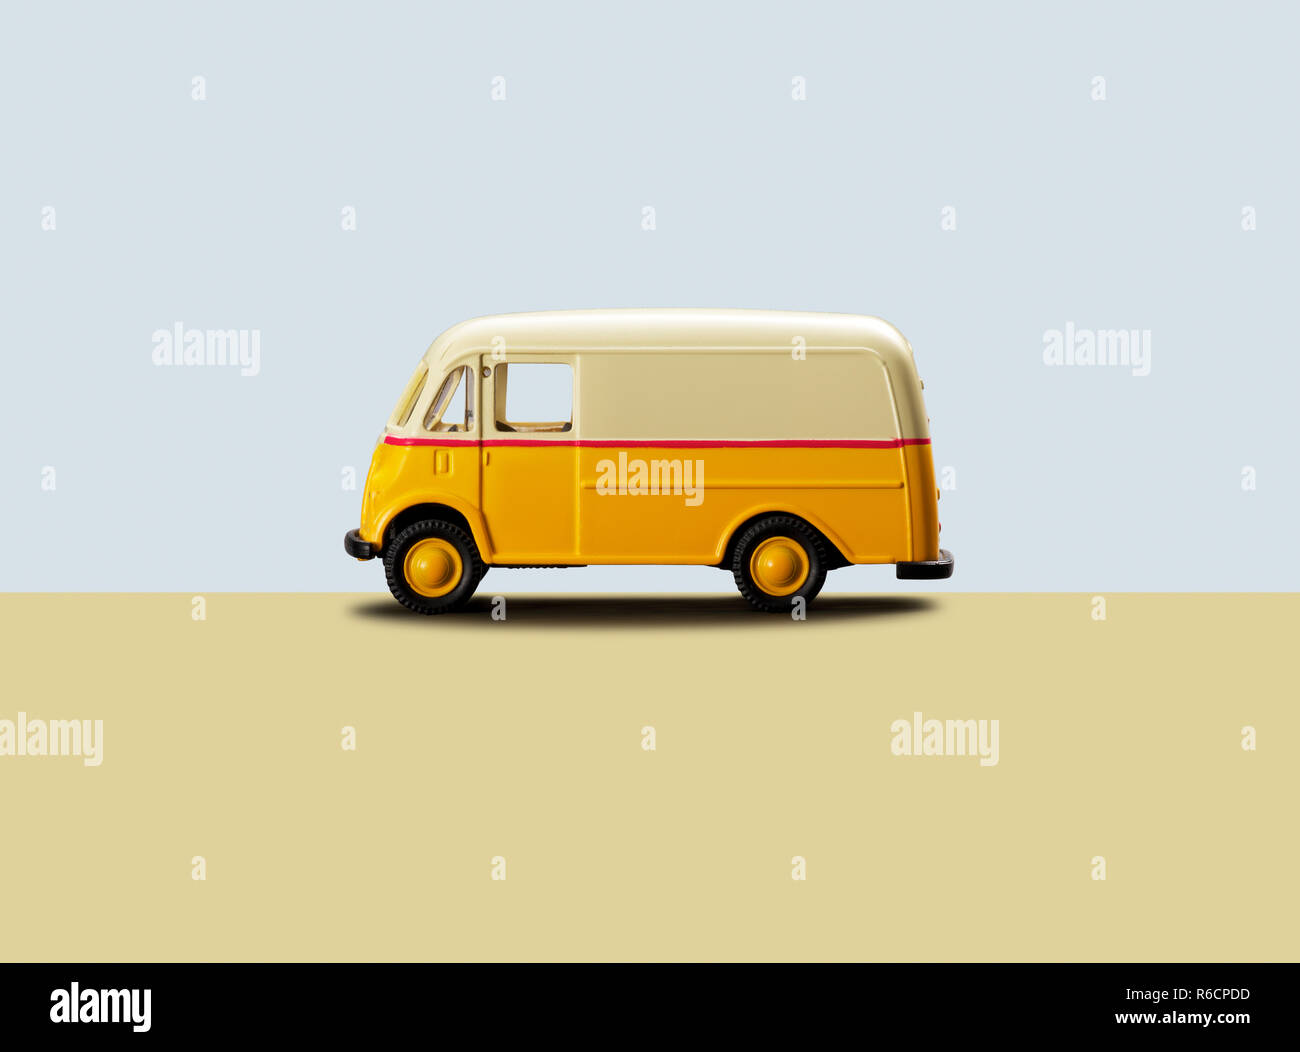 Retro yellow toy metal camper van against a plain background Stock Photo